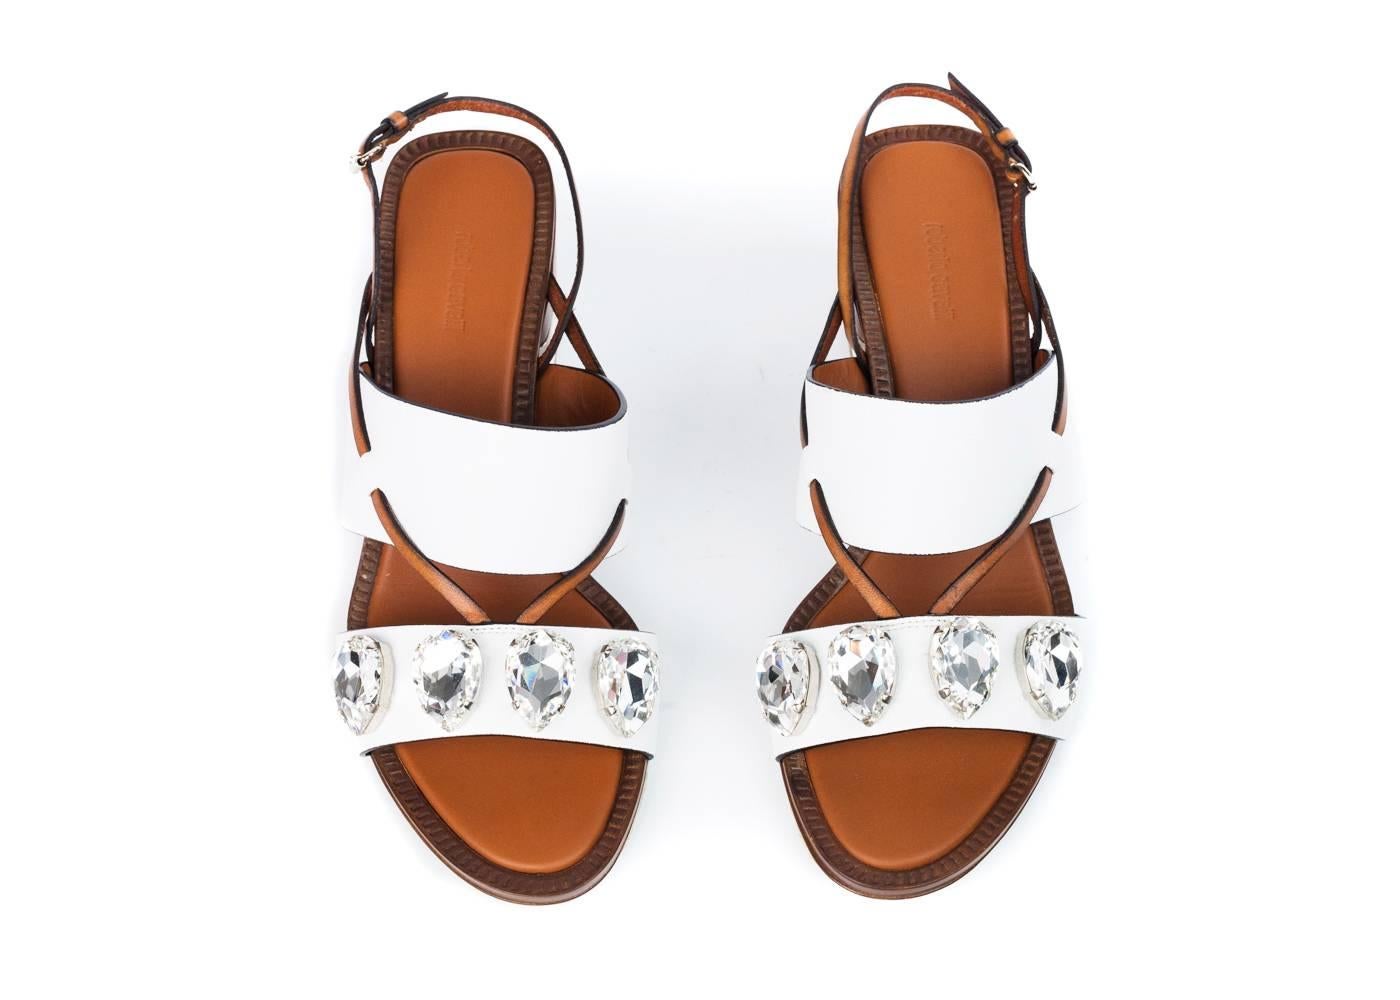 rand New Roberto Cavalli Sandals
Original Box & Dust Bag Included
Retails in Stores & Online for $1120
Size IT 38 / US 8 Fits True to Size

White leather Roberto Cavalli  sandals feature buckle ankle strap closure, crystal embellishments and block